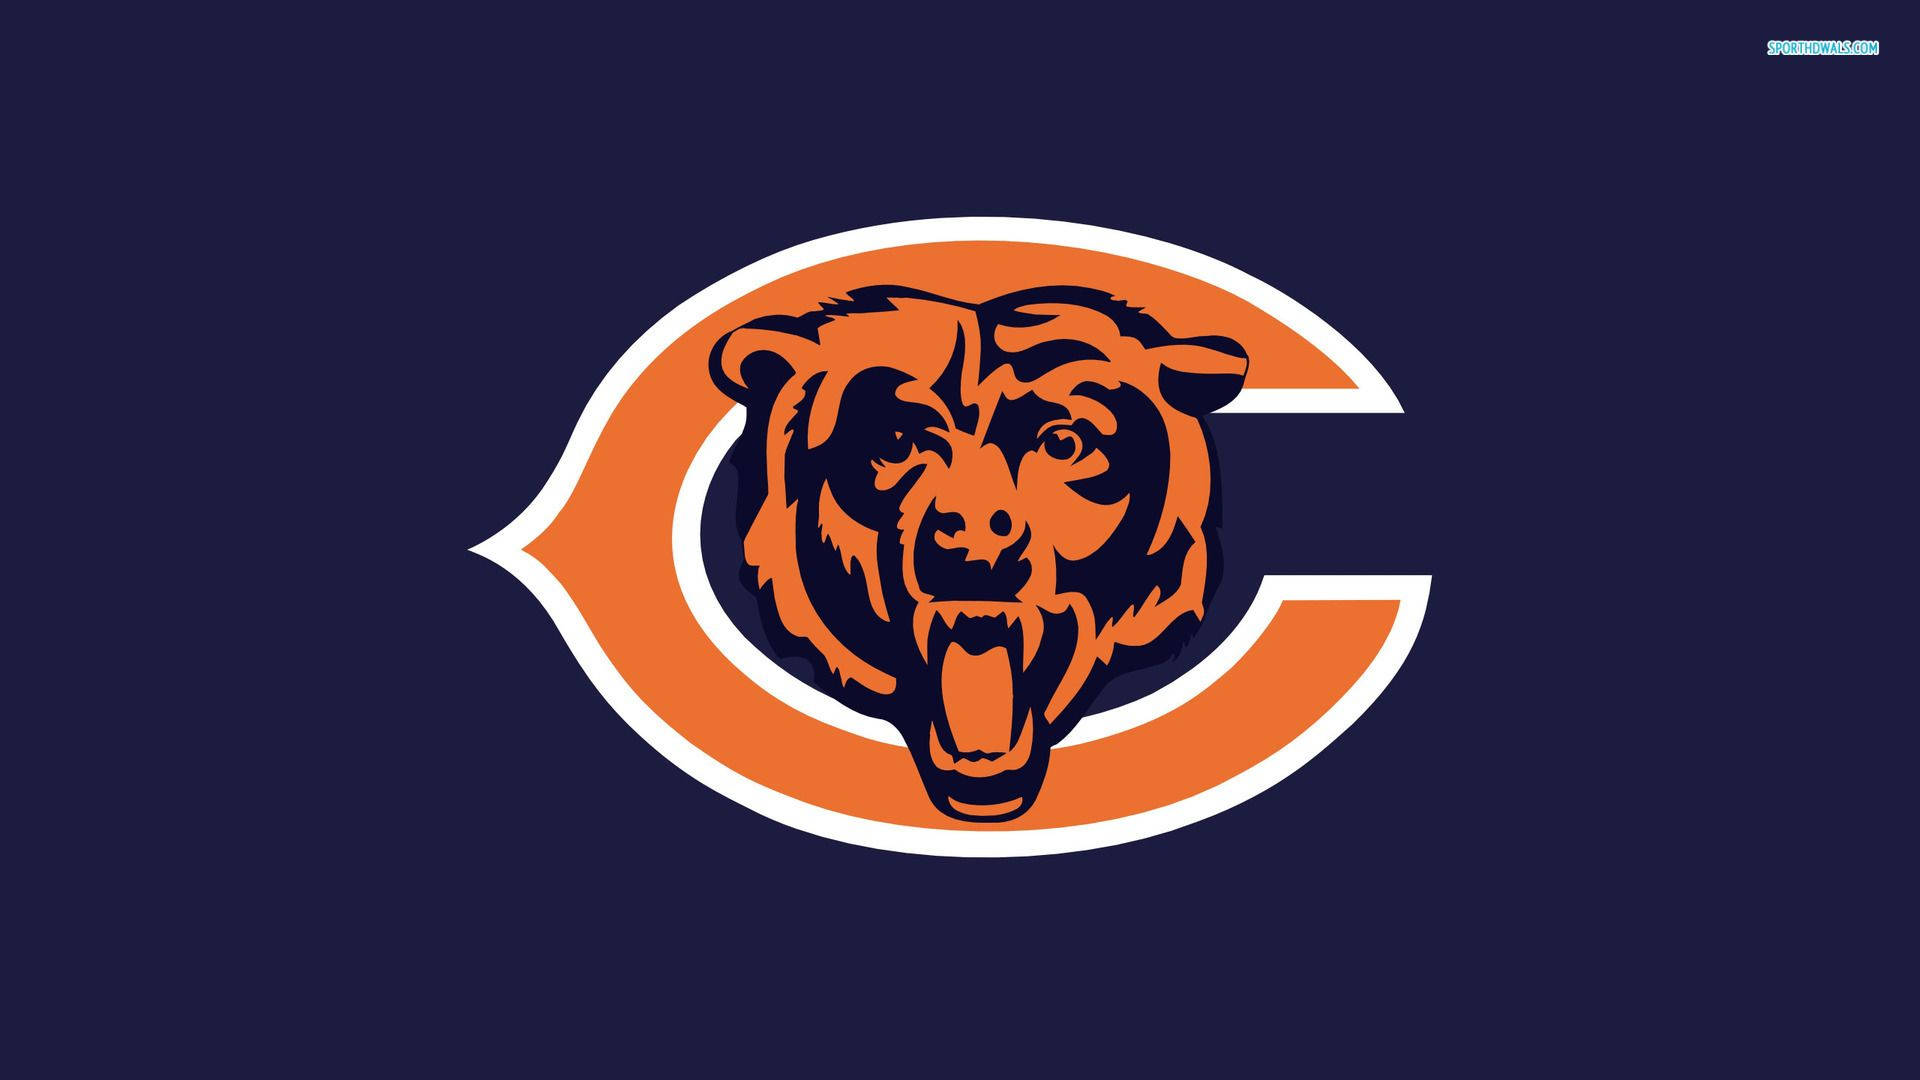 The Mighty Chicago Bears Wallpaper